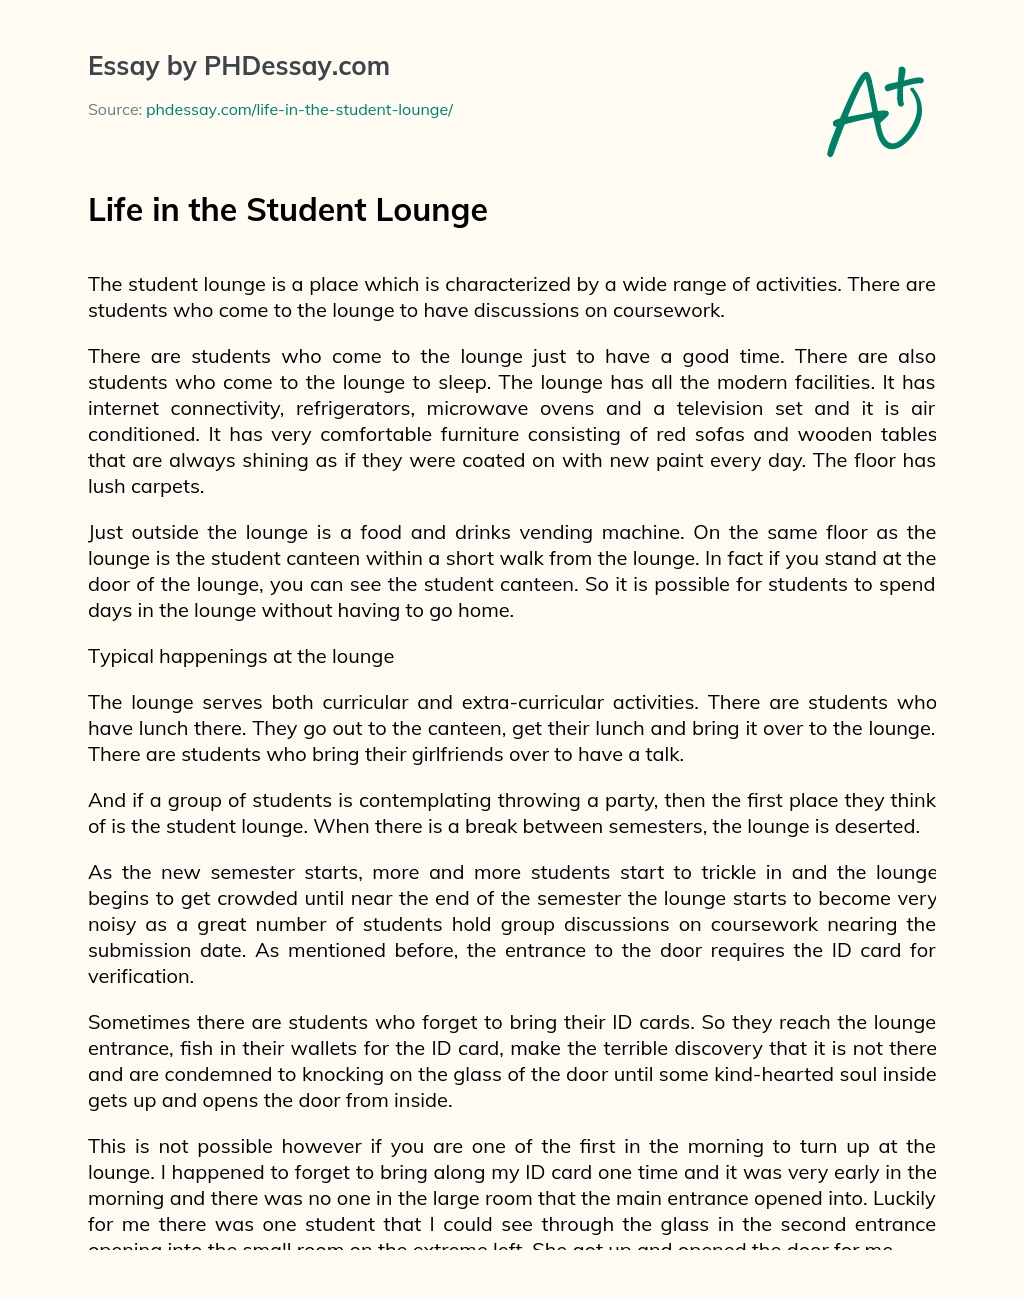 Life in the Student Lounge essay